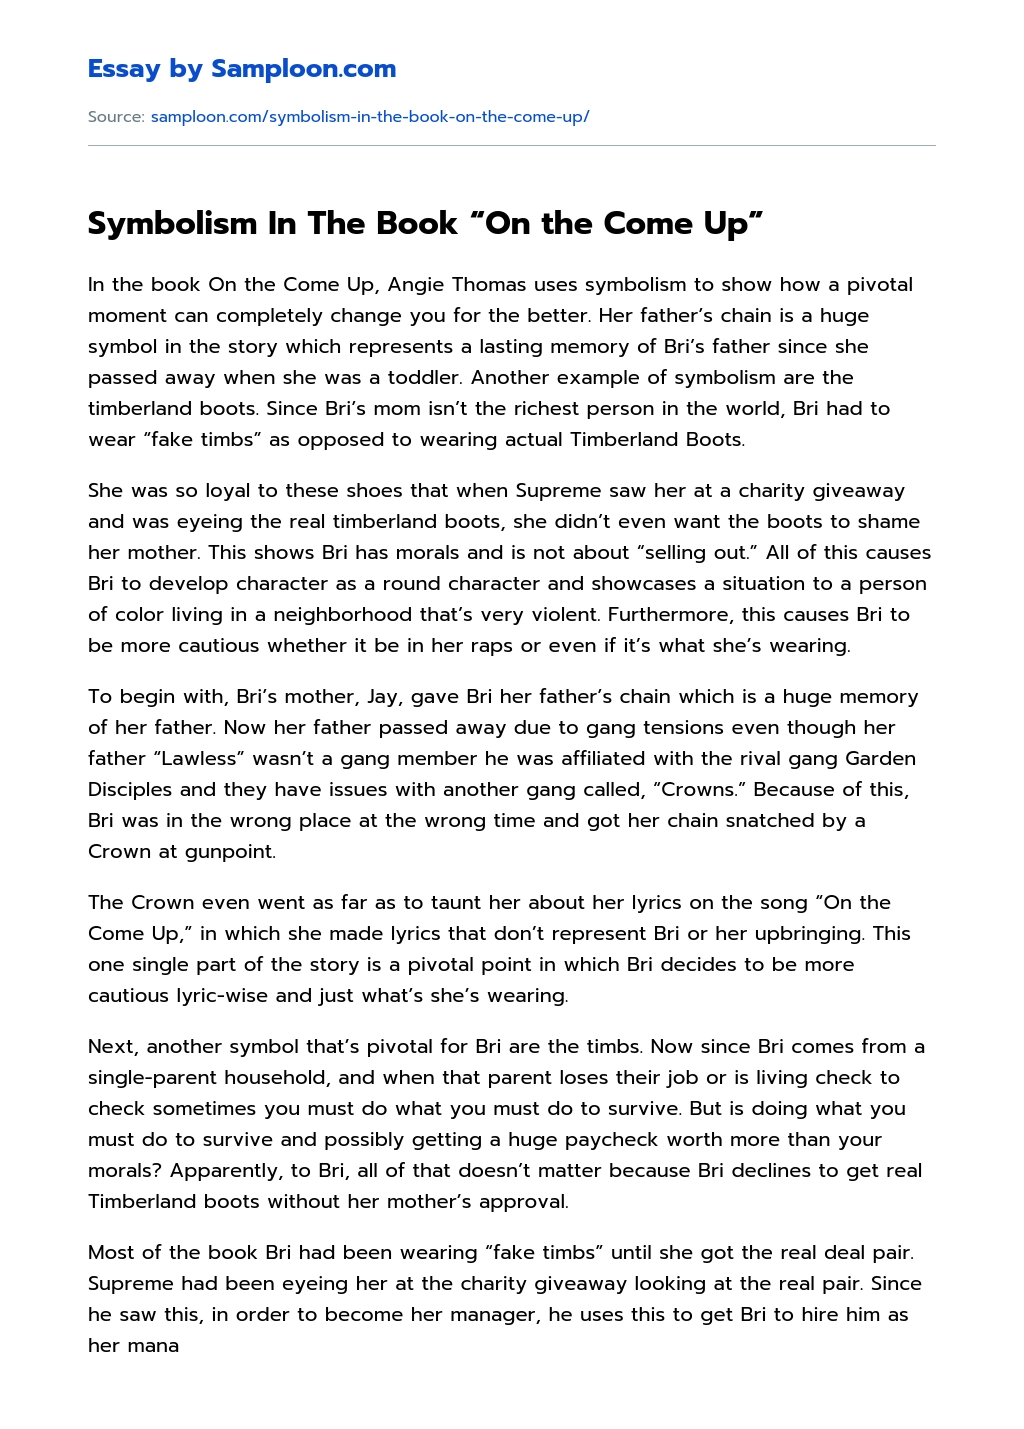 Symbolism In The Book “On the Come Up” essay